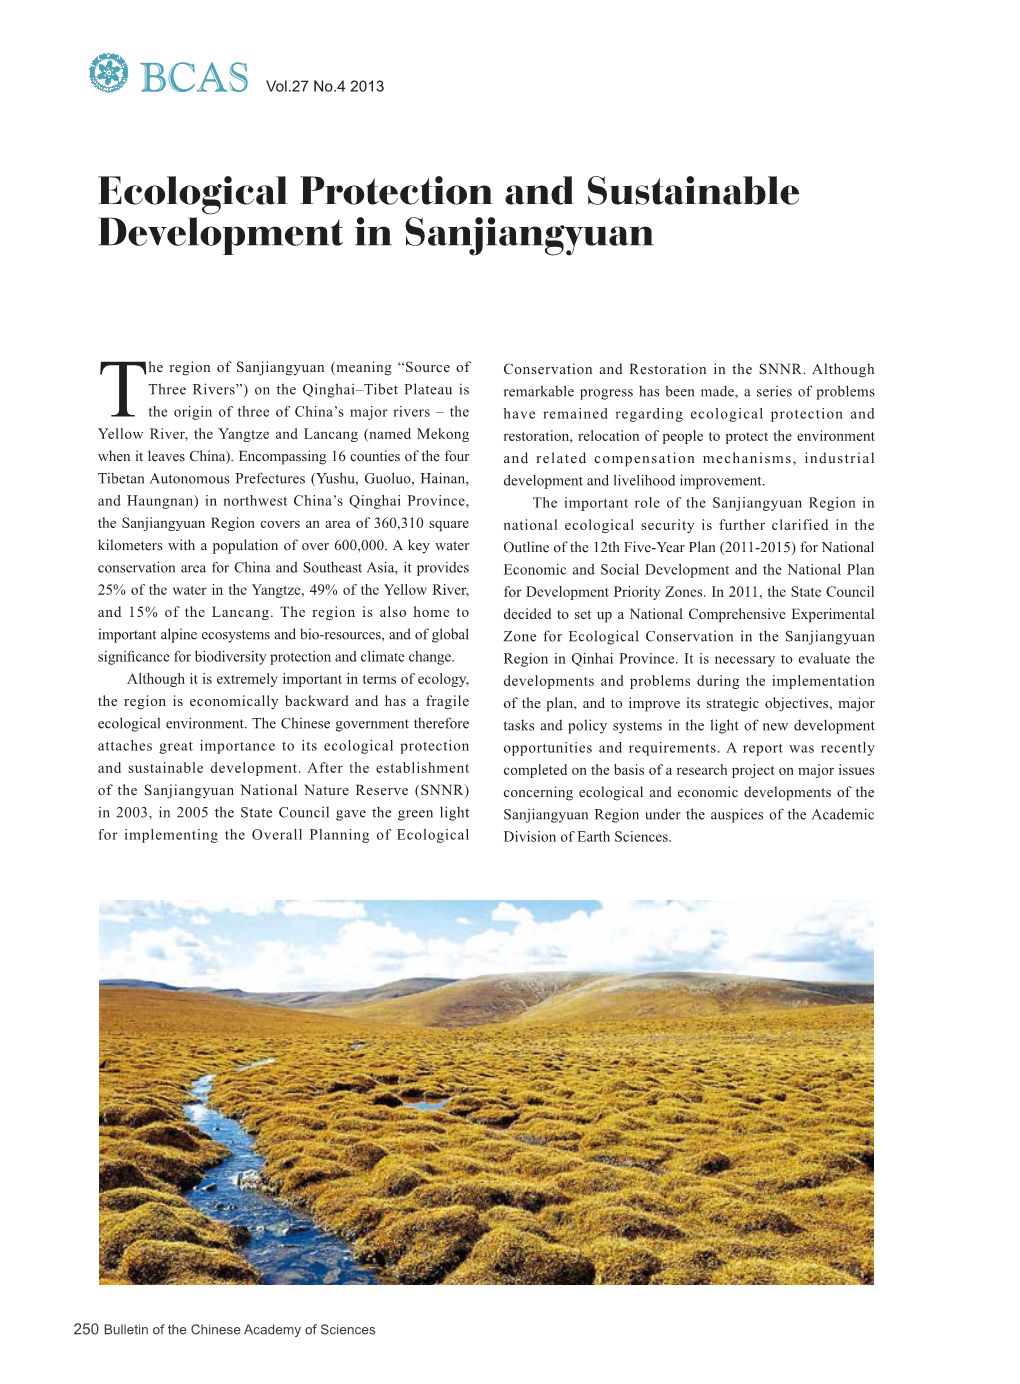 Ecological Protection and Sustainable Development in Sanjiangyuan